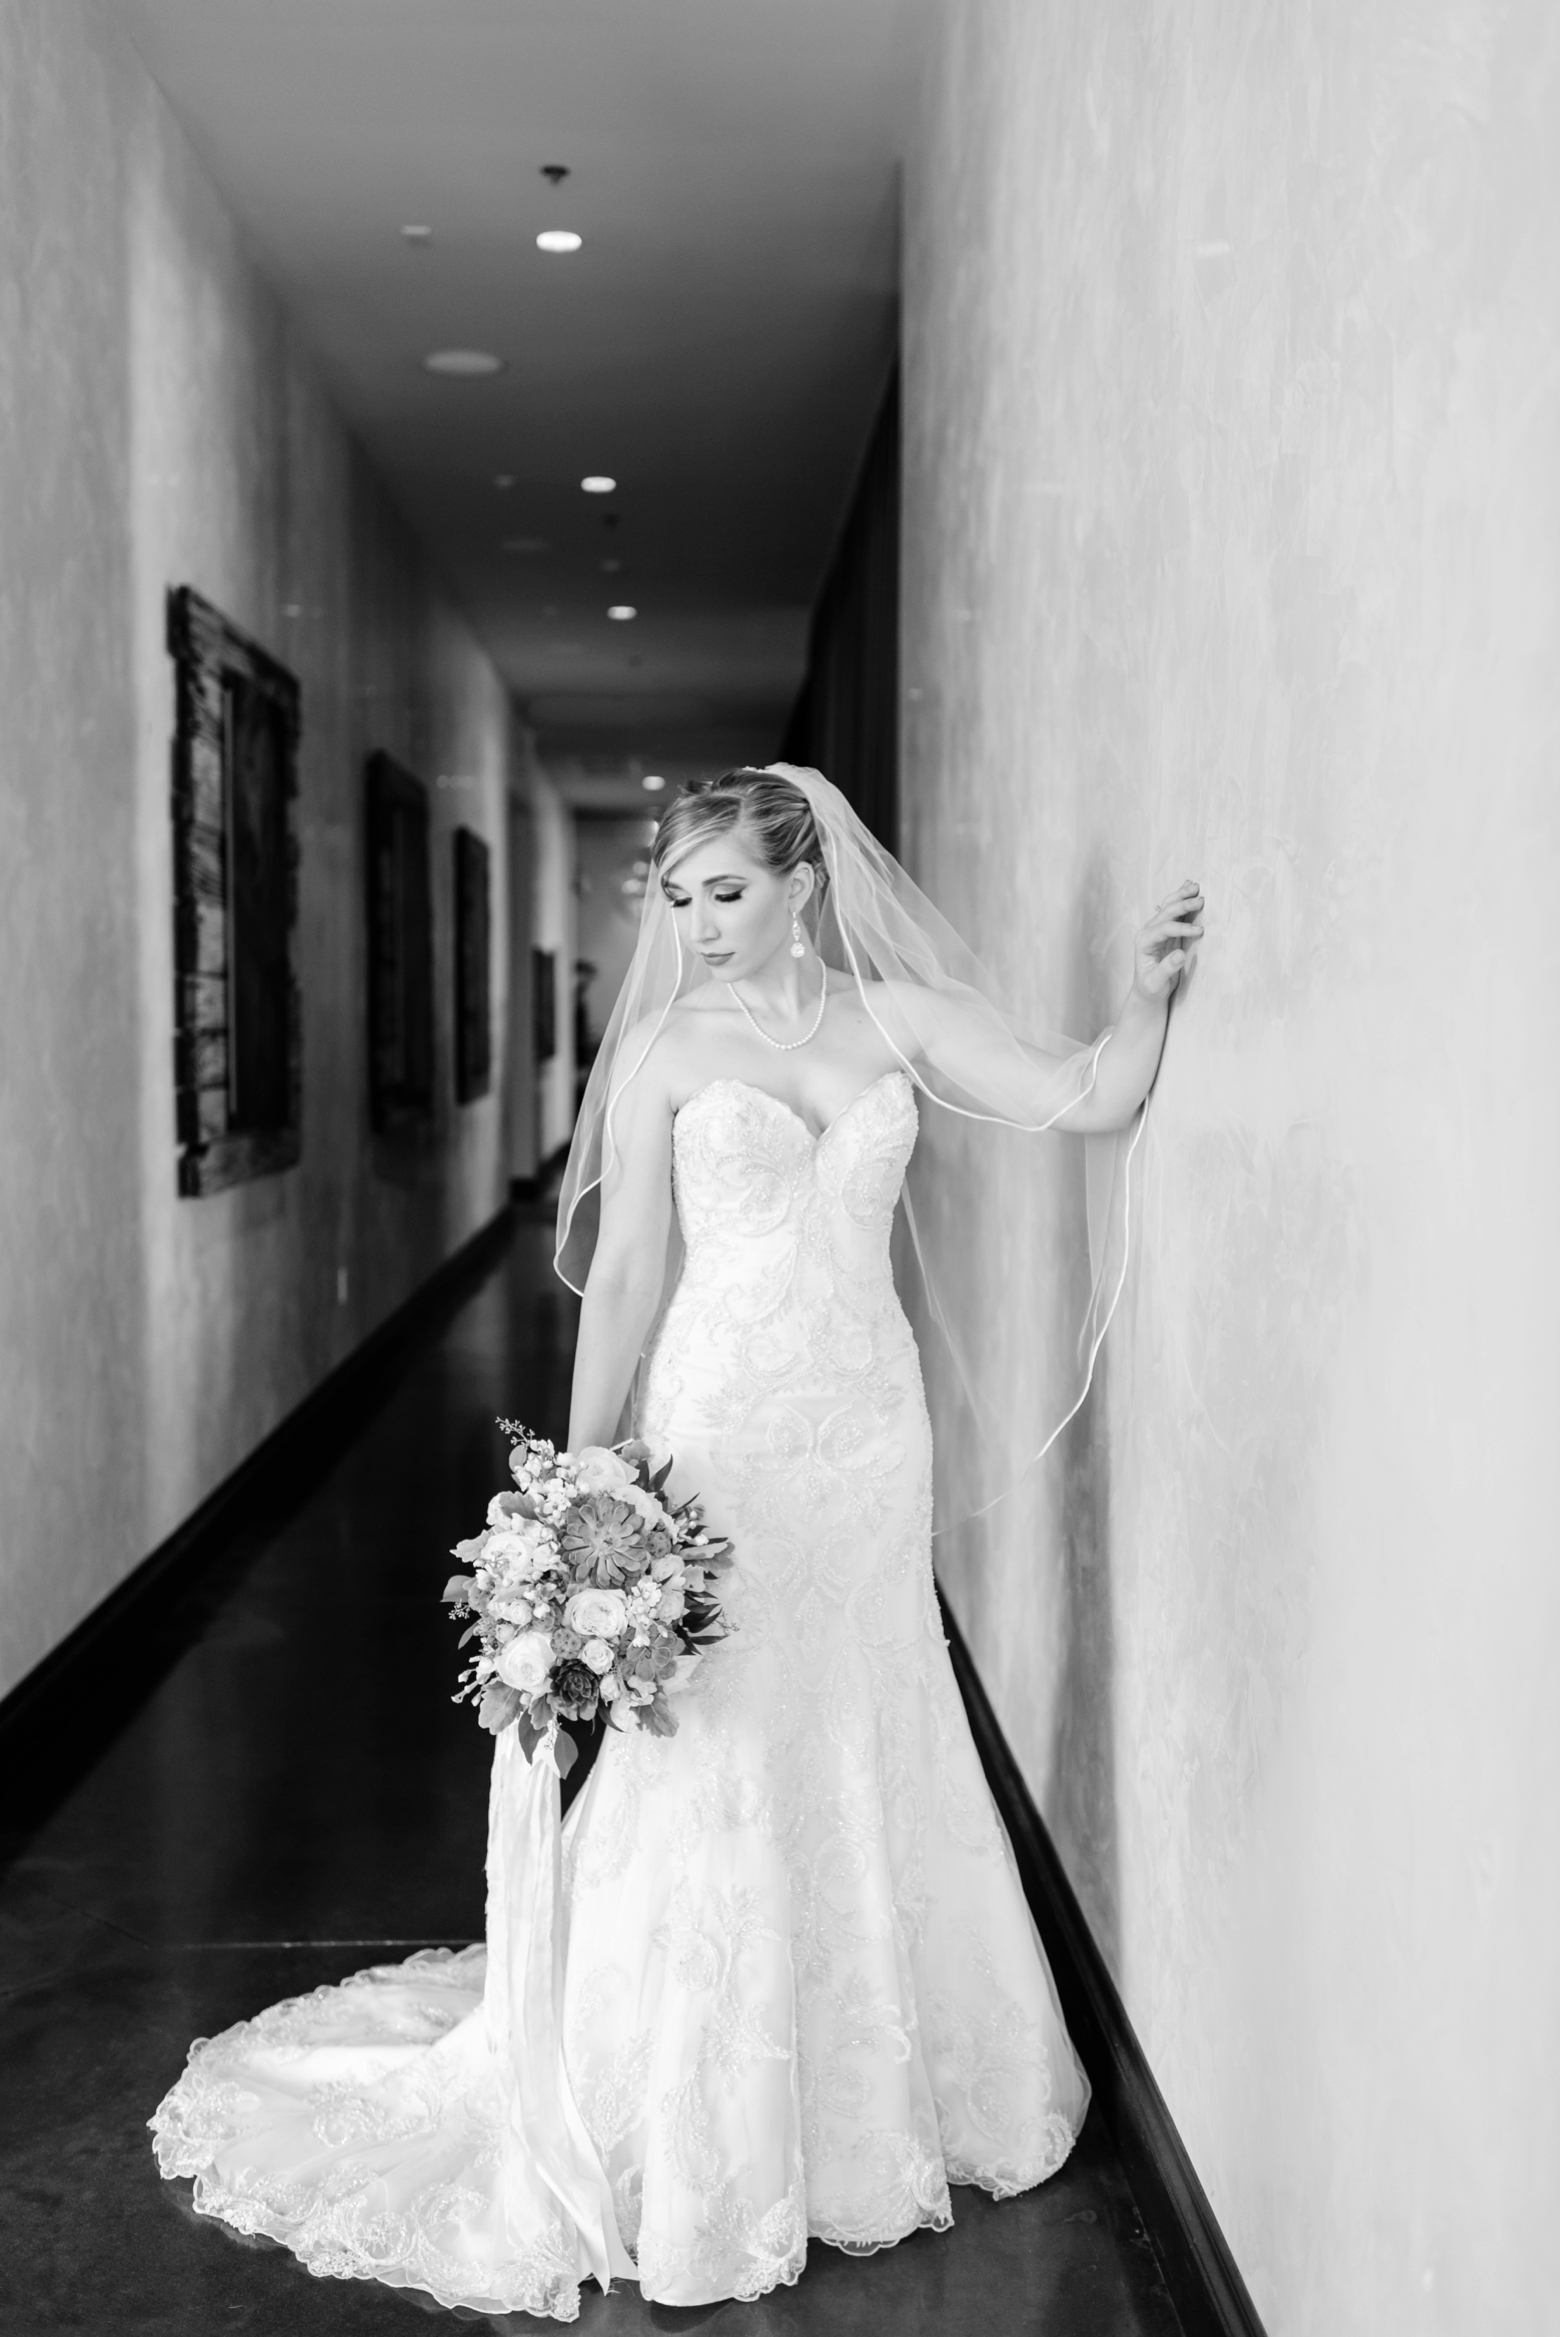 The Bride poses in the halls of the Epicurean Hotel holding her bouquet